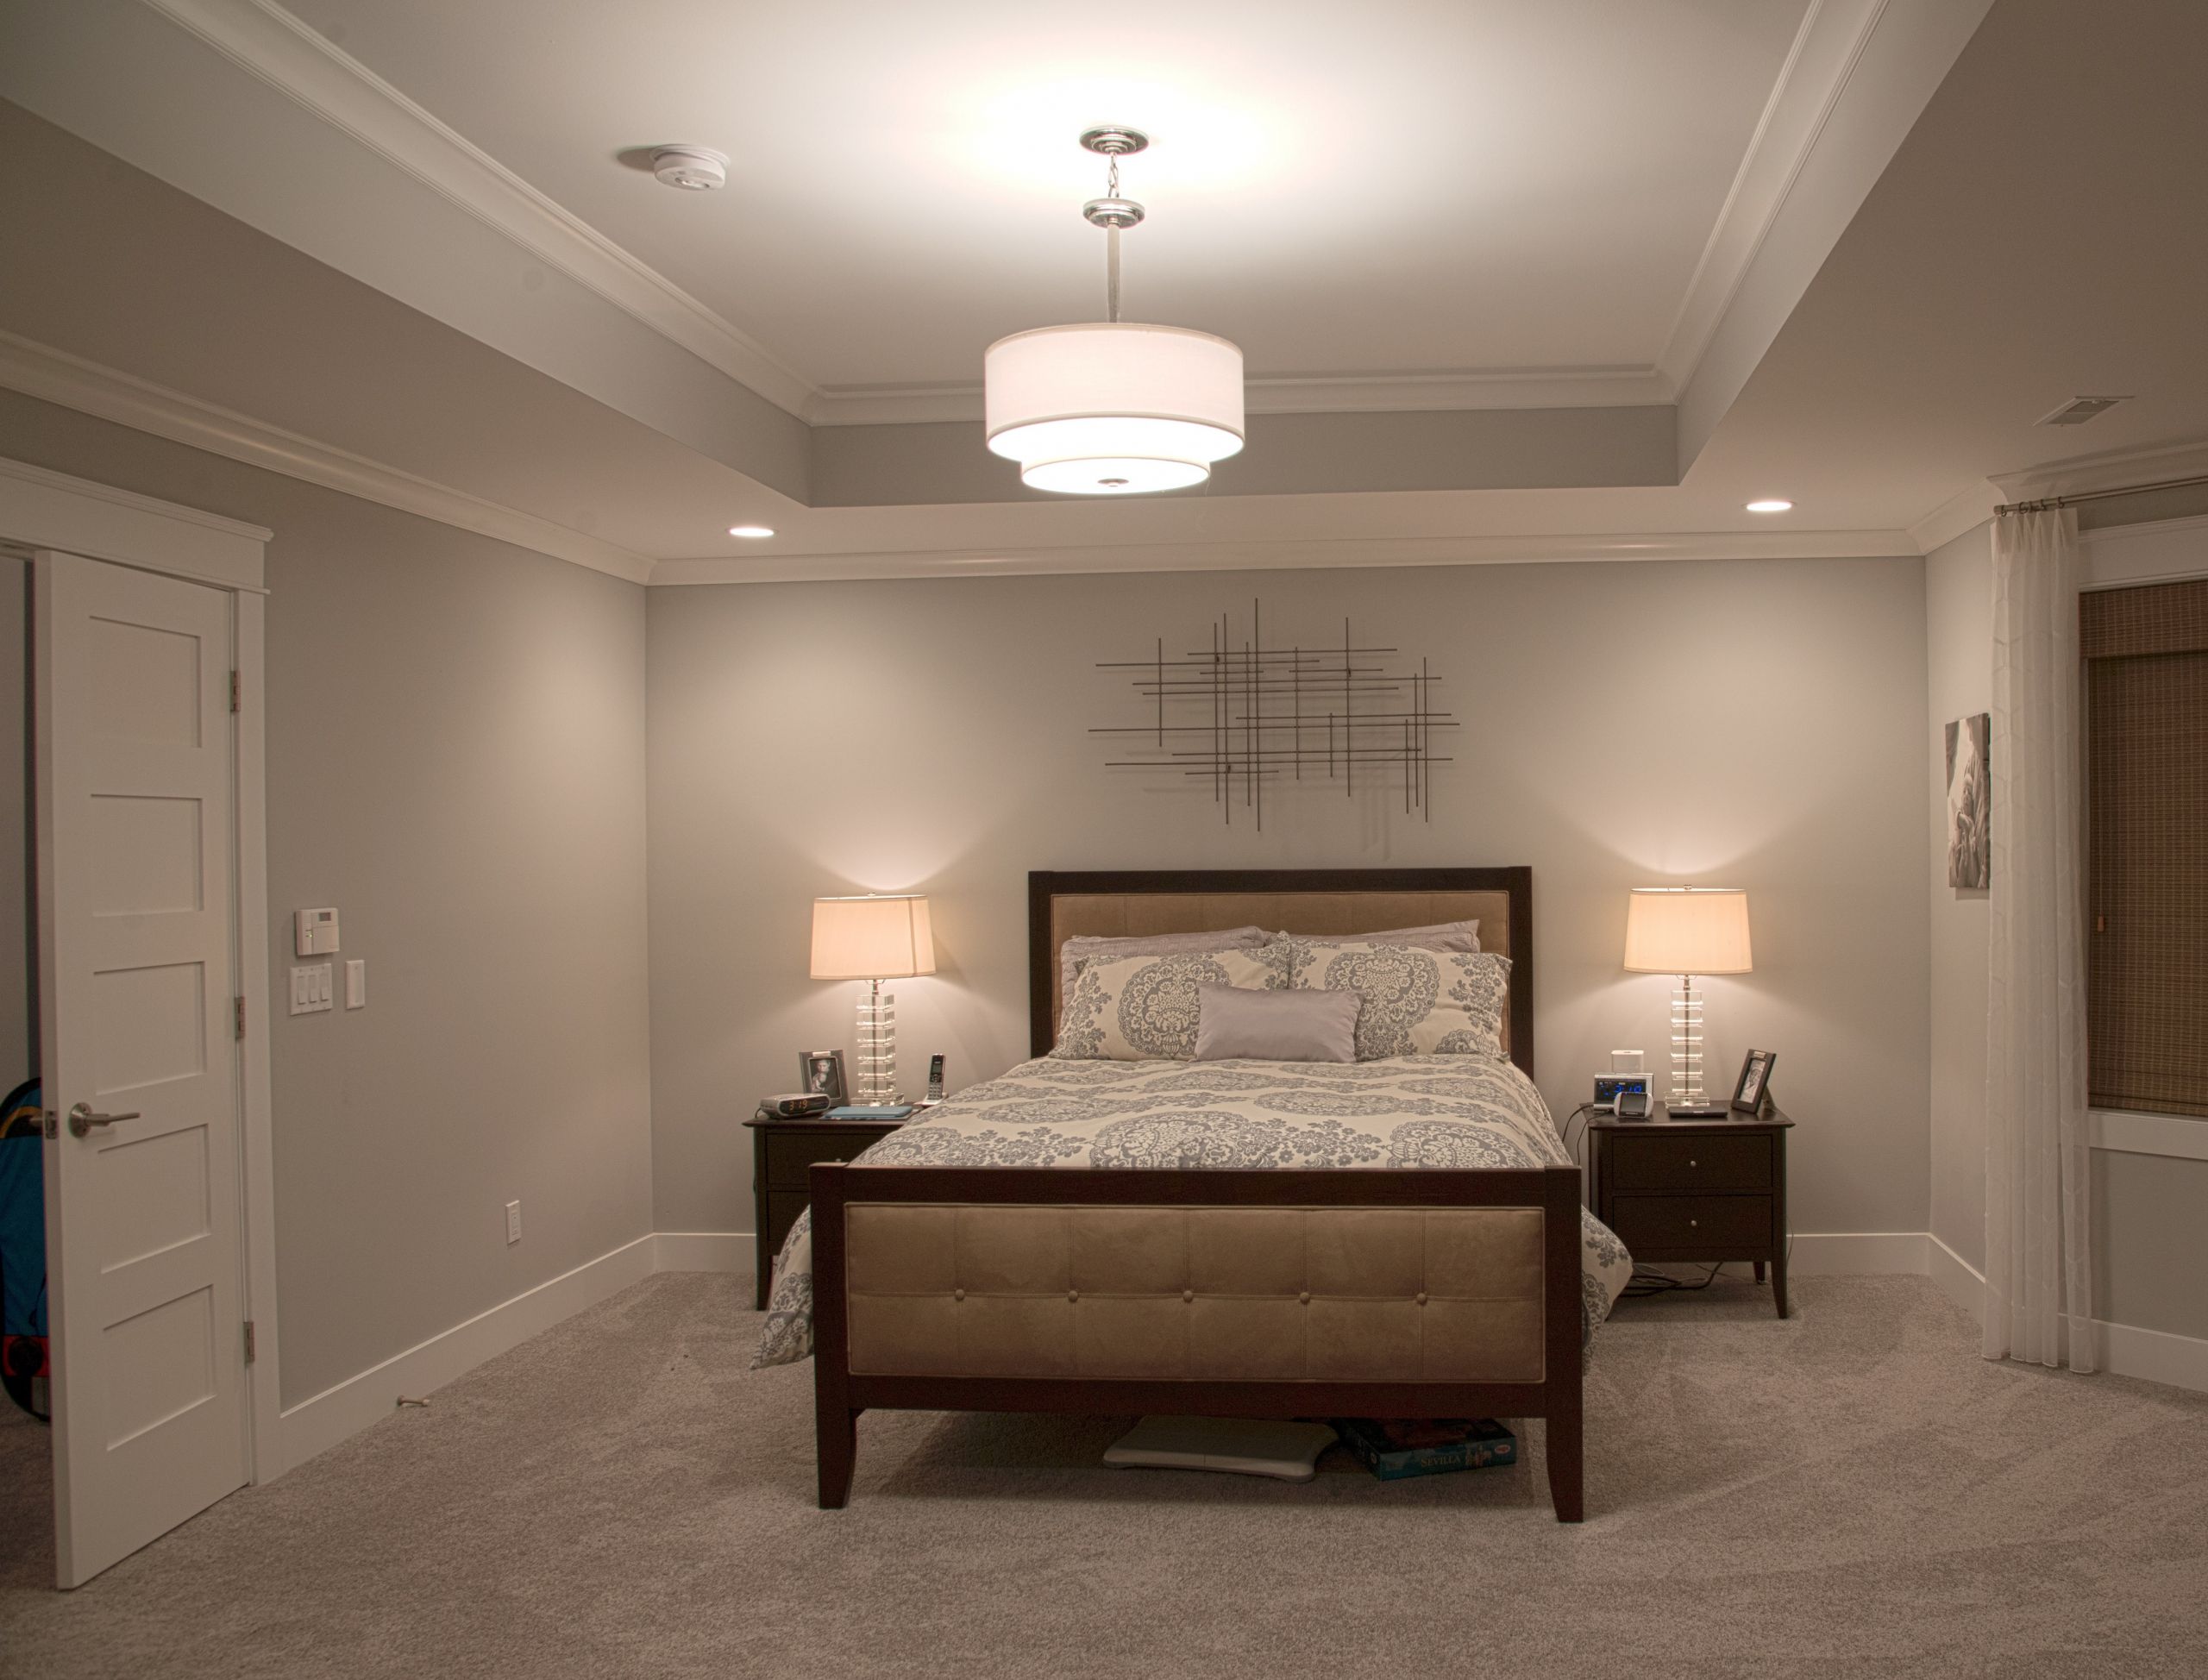 Ceiling Lights Bedroom
 What s Your Design Style Gross Electric